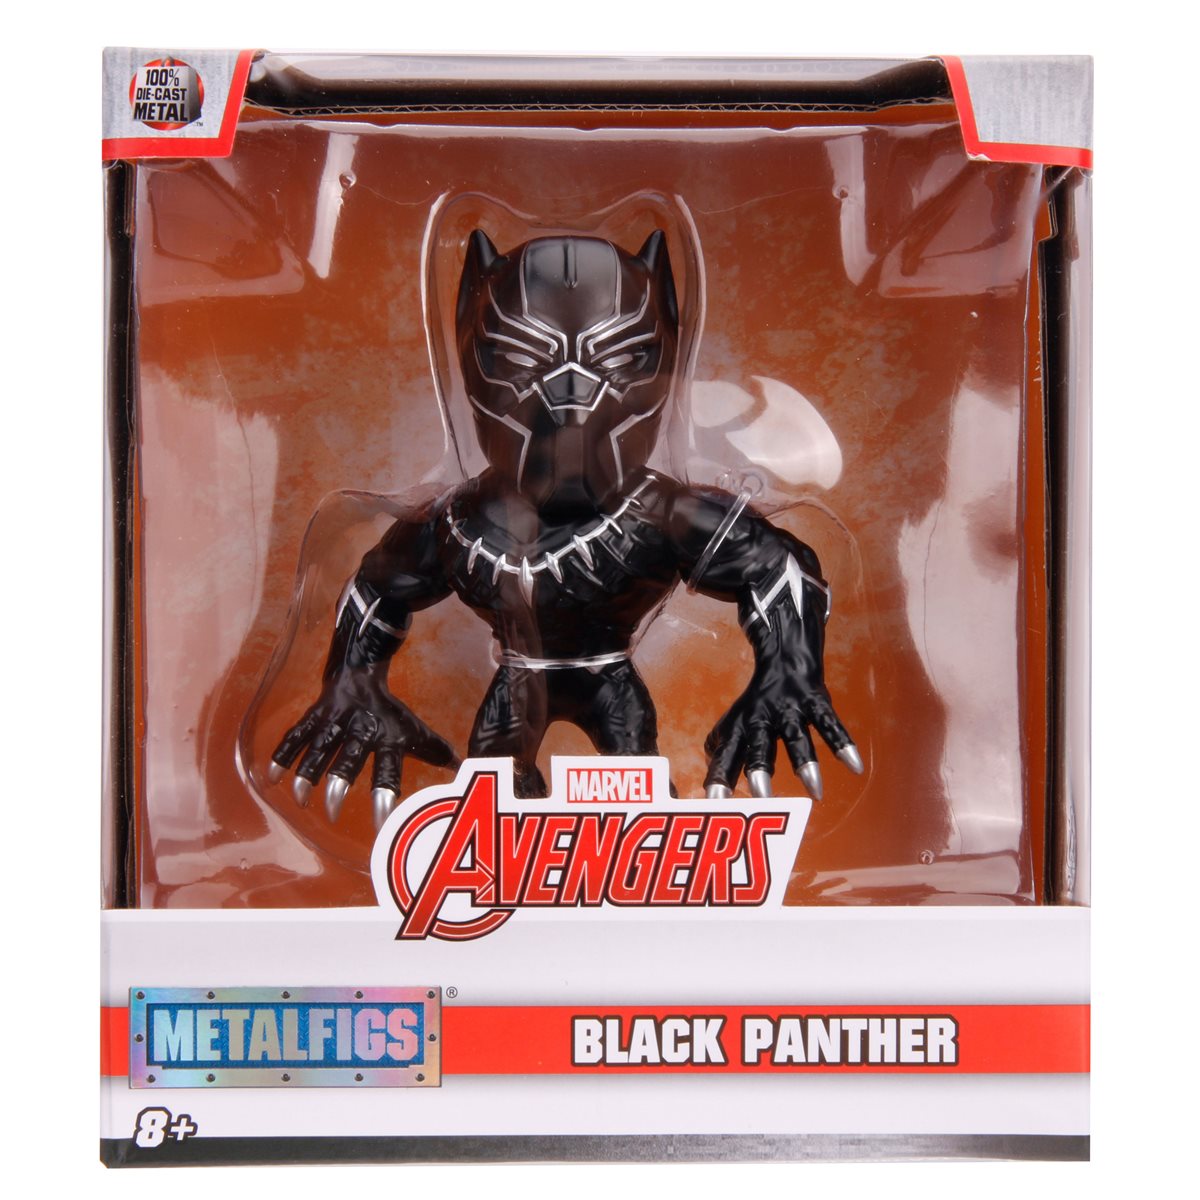 Marvel Avengers Nano Metalfigs Die-cast Figures w/exclusives Black Panther Thor 